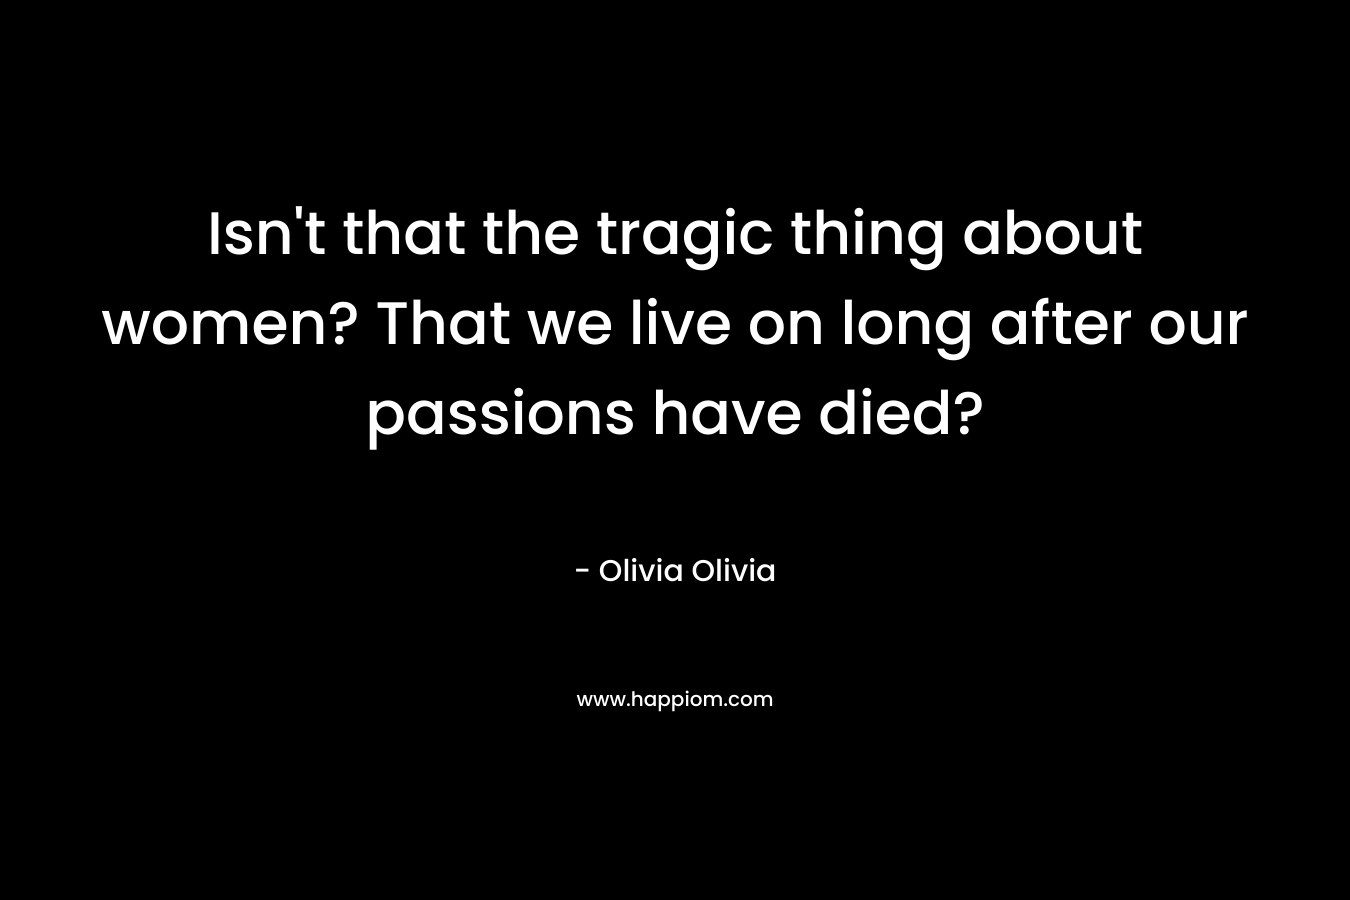 Isn't that the tragic thing about women? That we live on long after our passions have died?